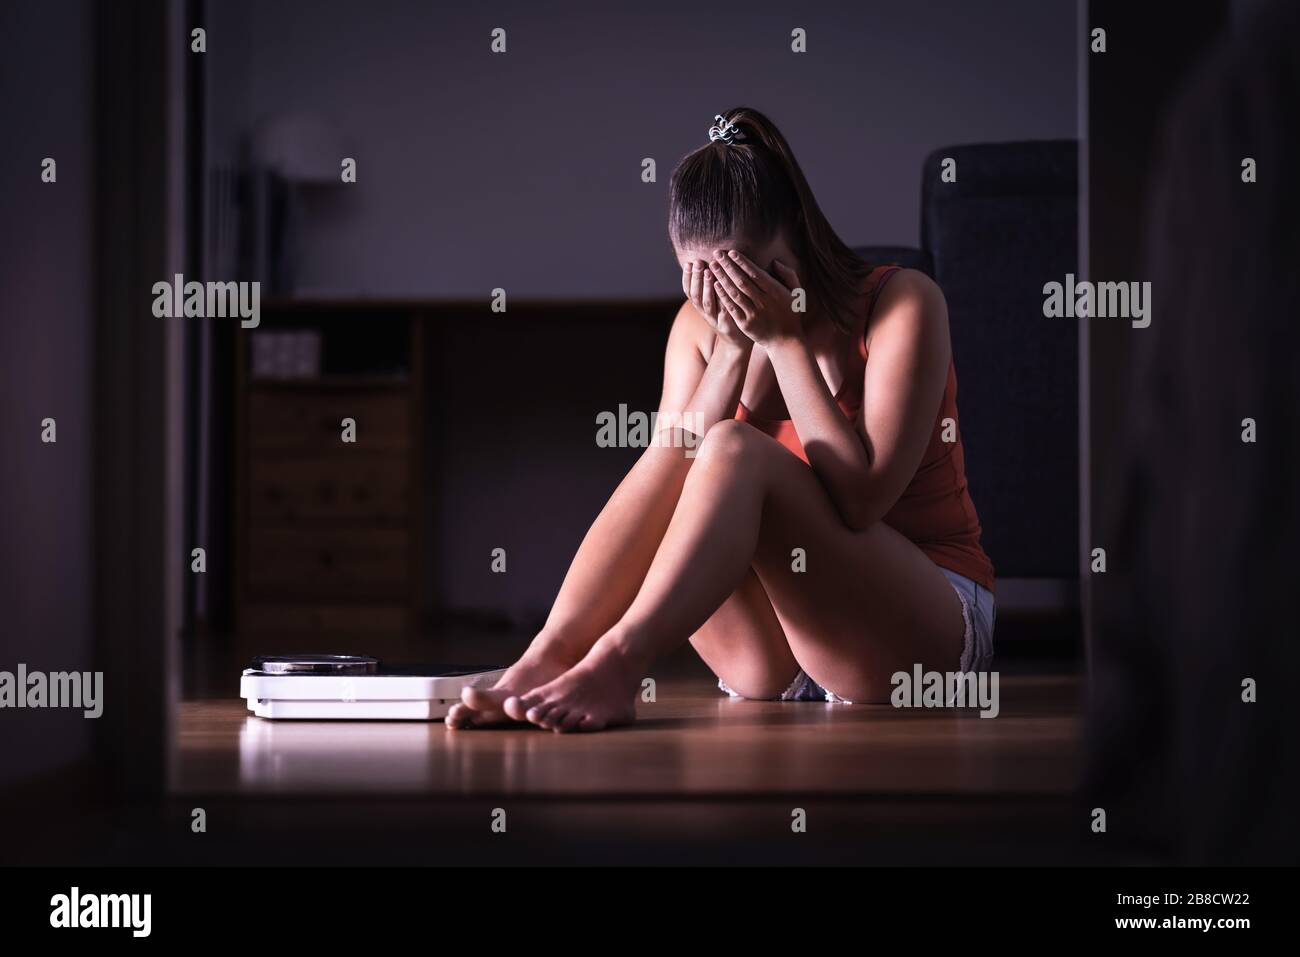 Pressure and stress about weight loss, diet or gaining weight. Eating disorder, anorexia or bulimia concept. Frustrated woman sitting on floor. Stock Photo